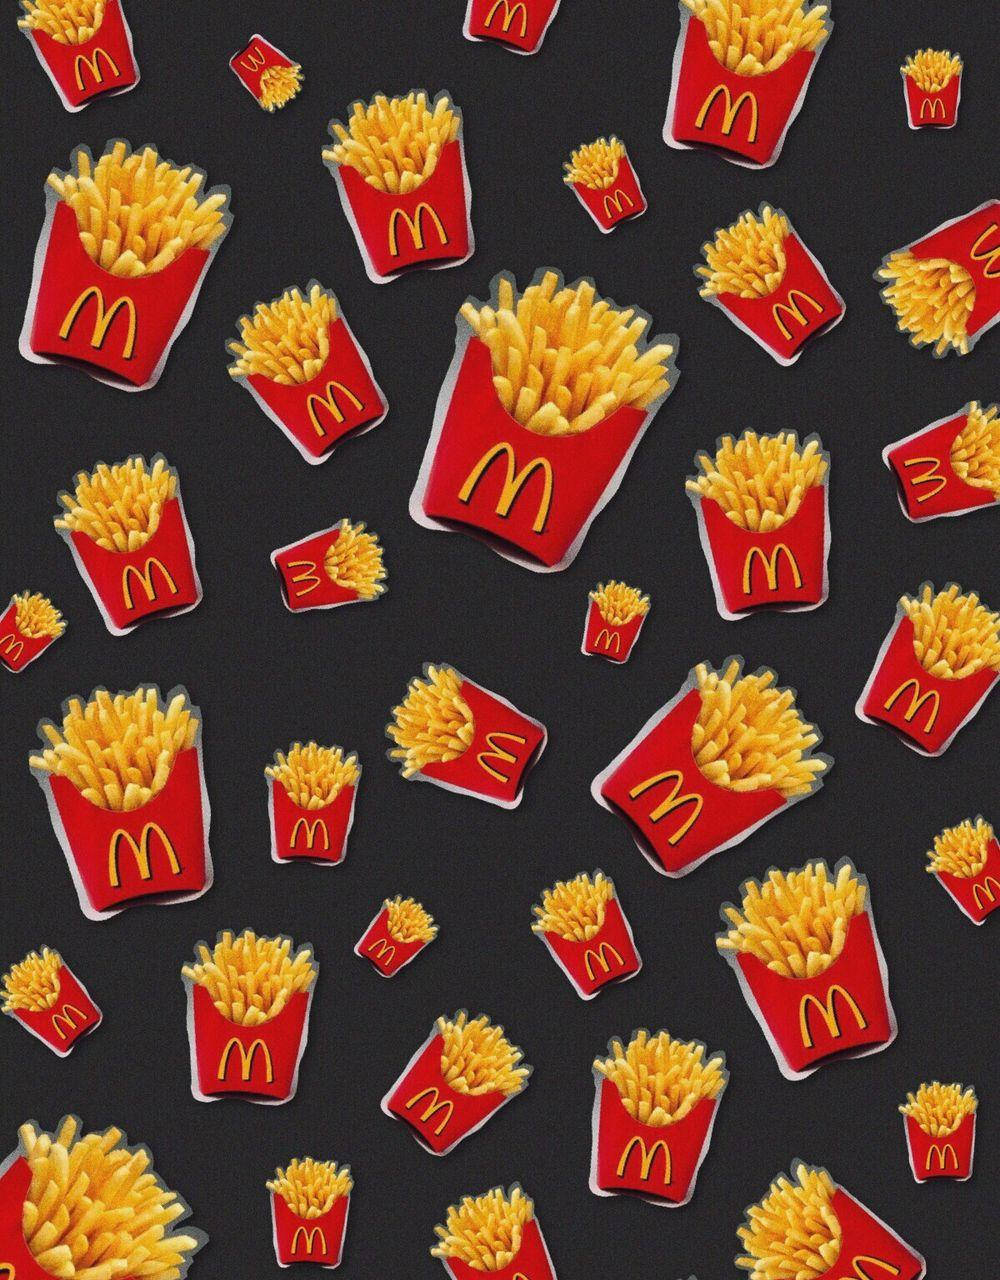 A Mouth-watering Pattern of Golden-Crisp French Fries Wallpaper